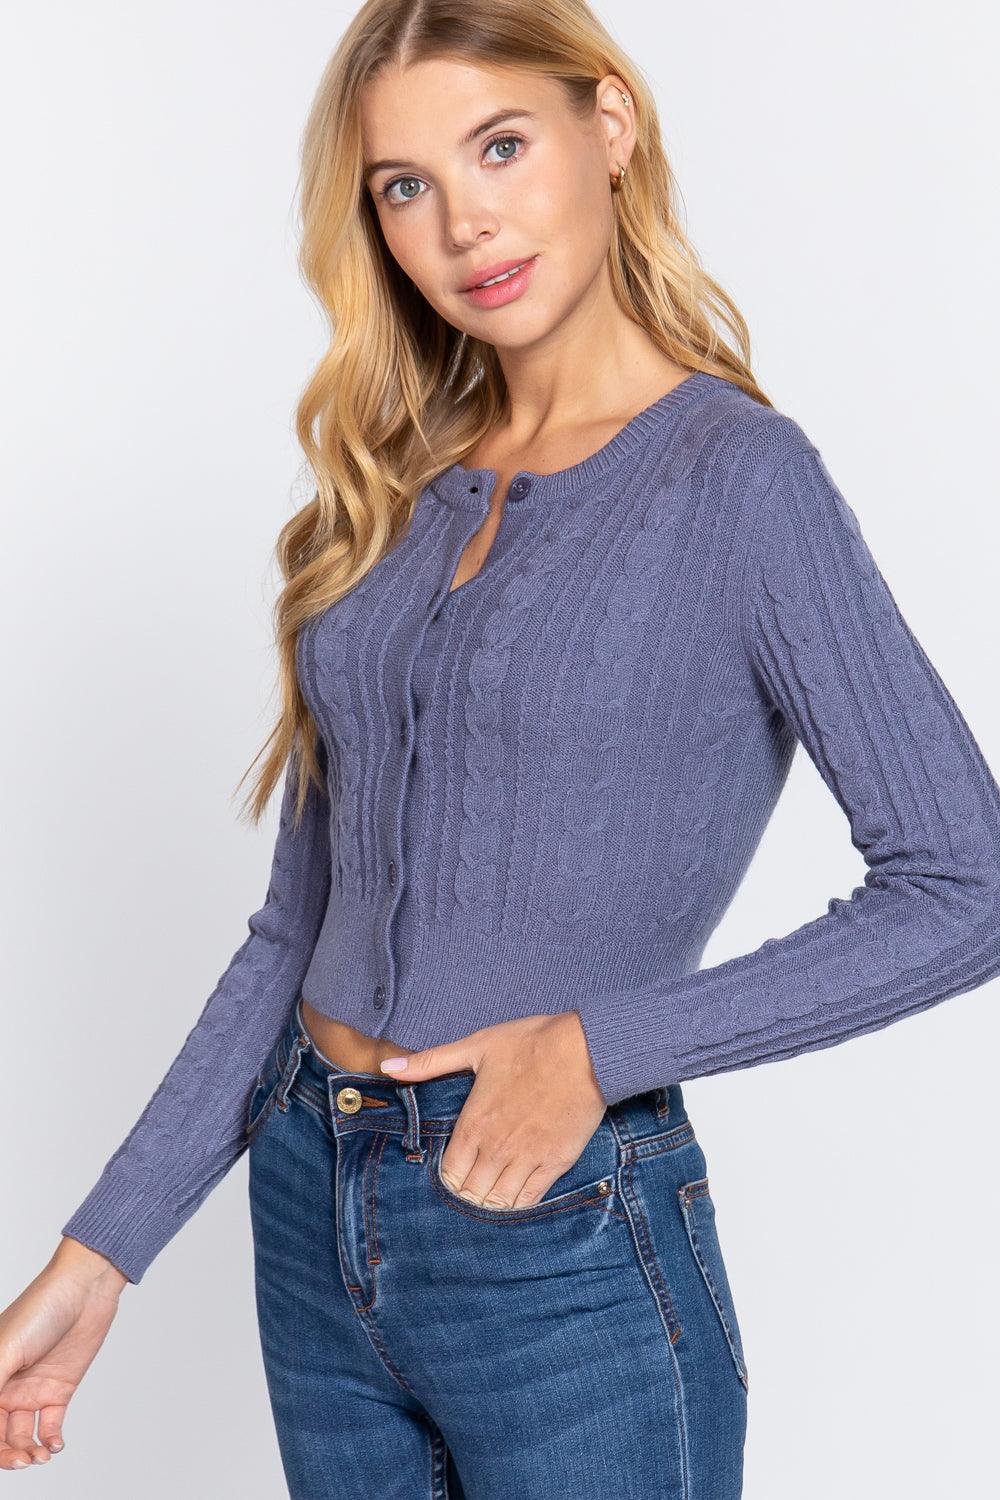 Buying Guide: Stylish and Healthy Dresses 2023 | Fashionably Fit | Crew Neck Cable Sweater Cardigan